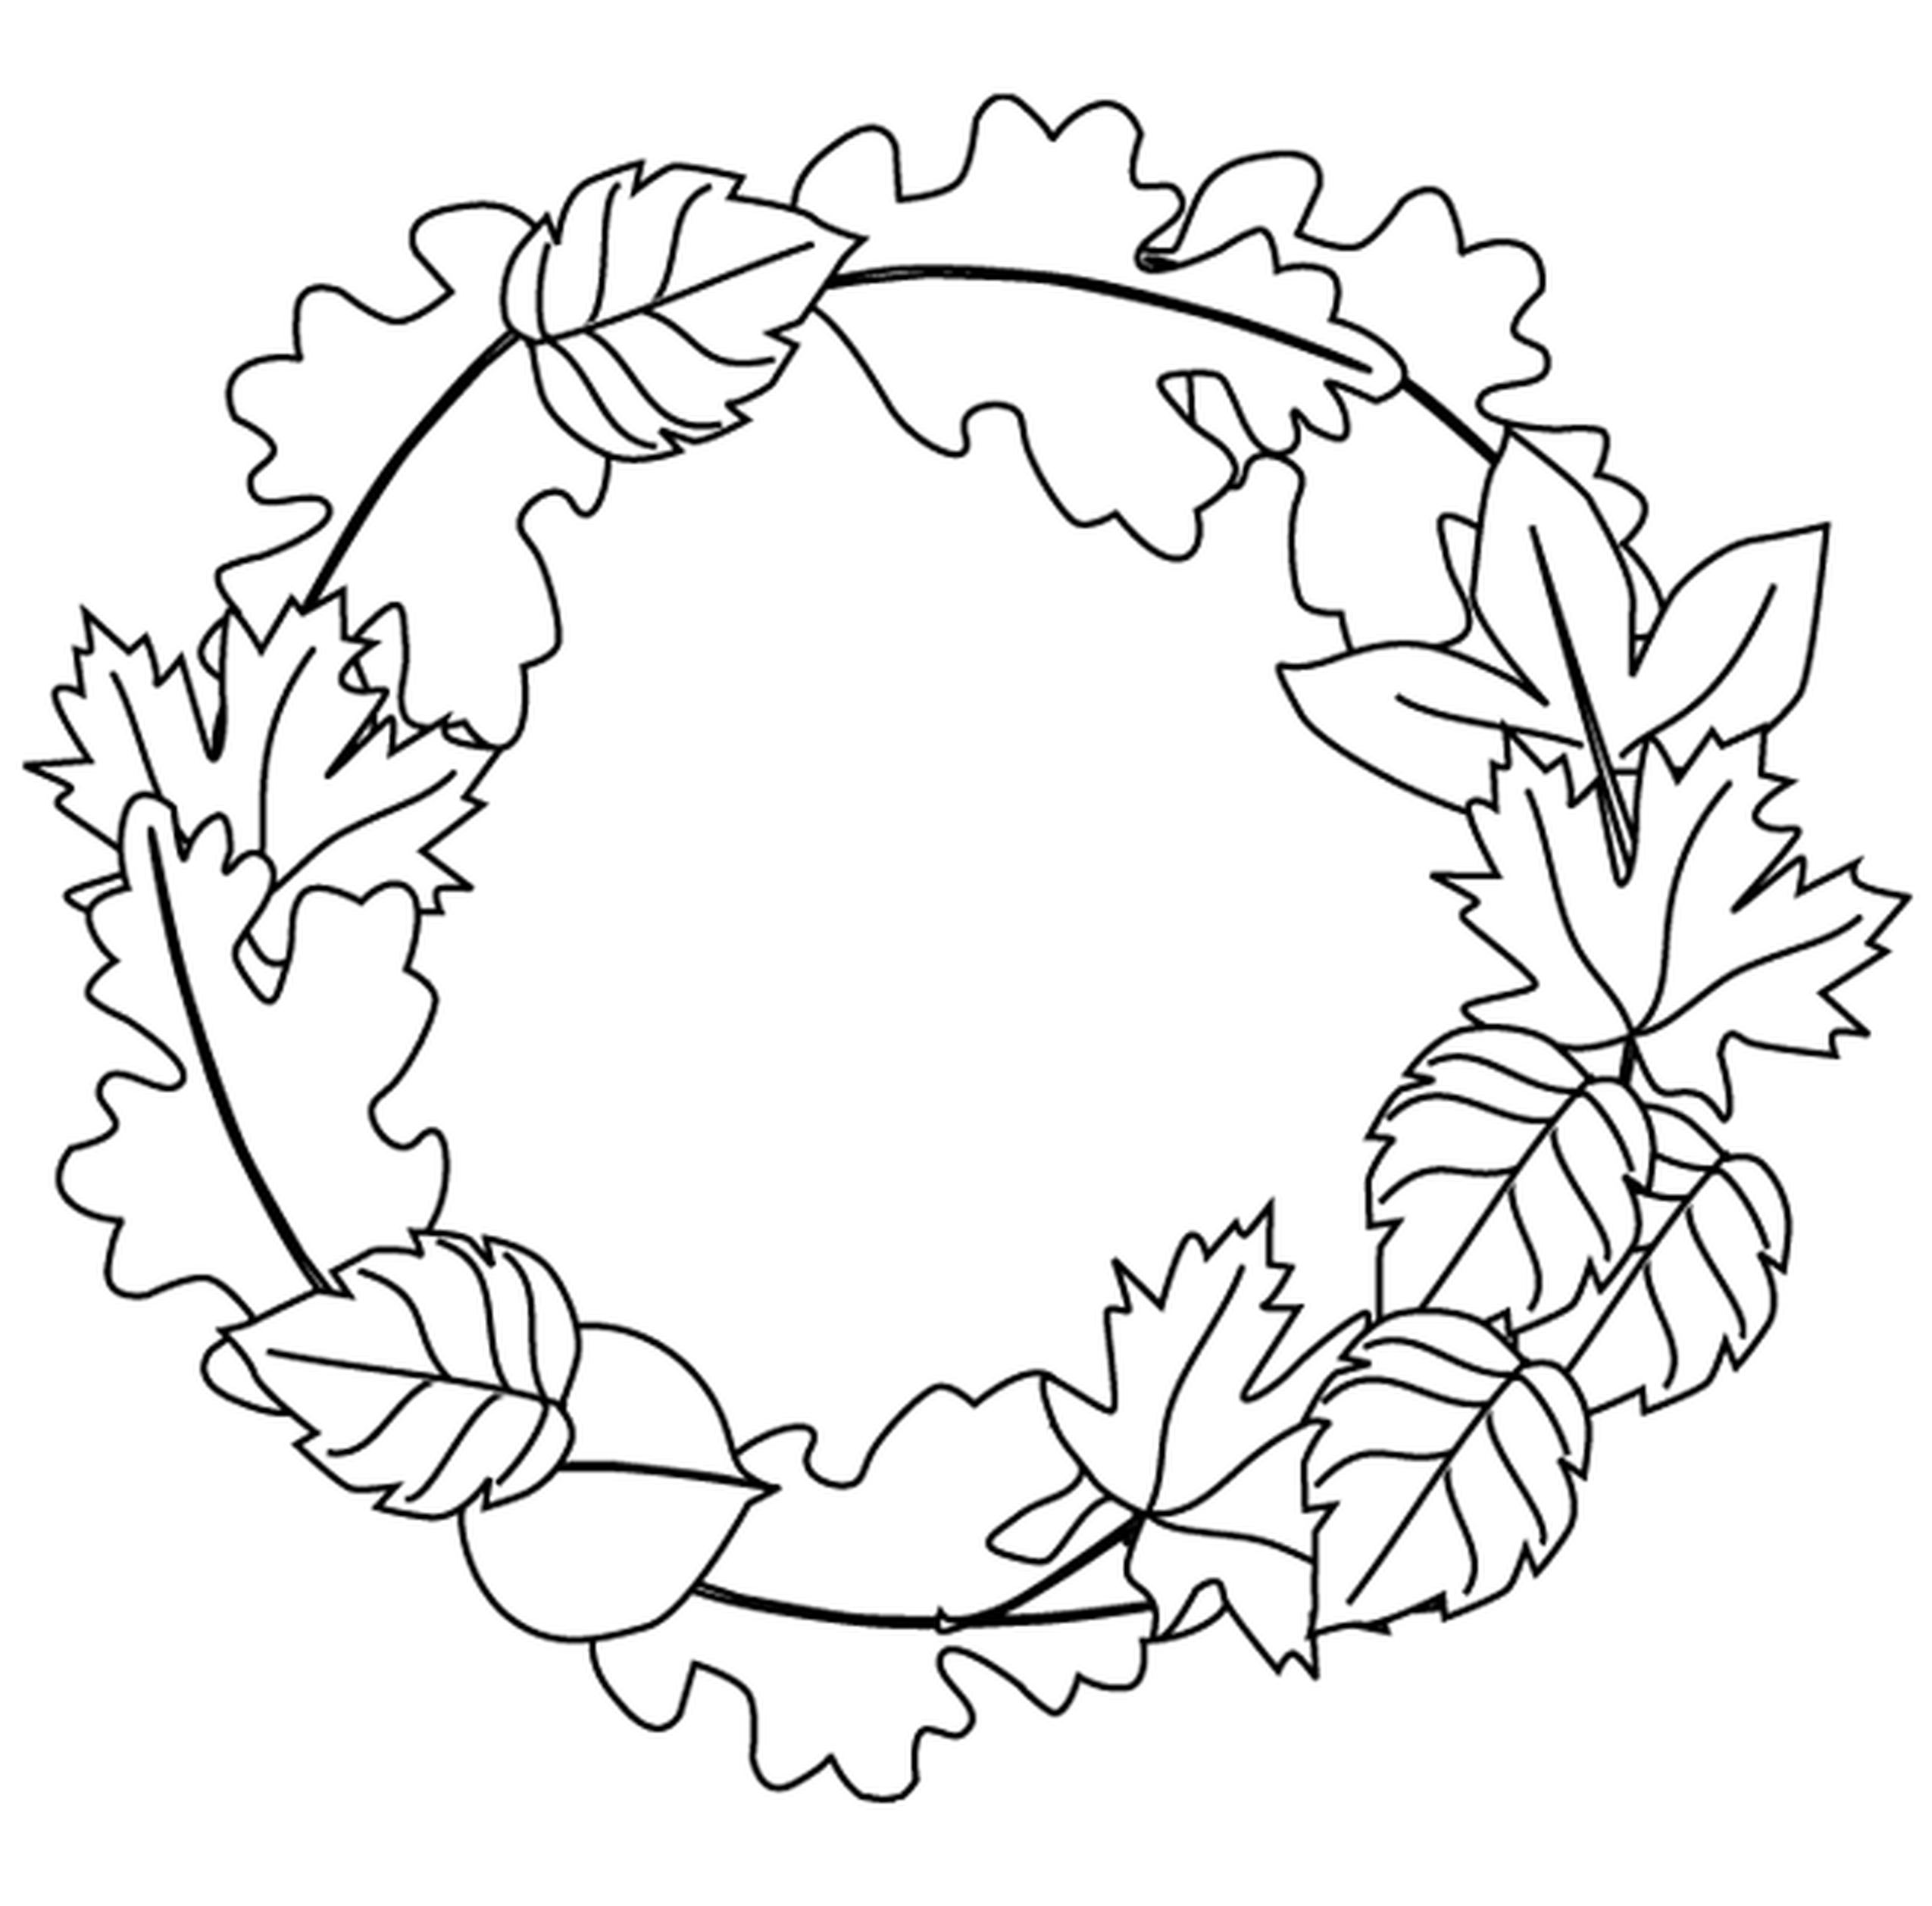 Free Printable Autumn Leaves Coloring Pages